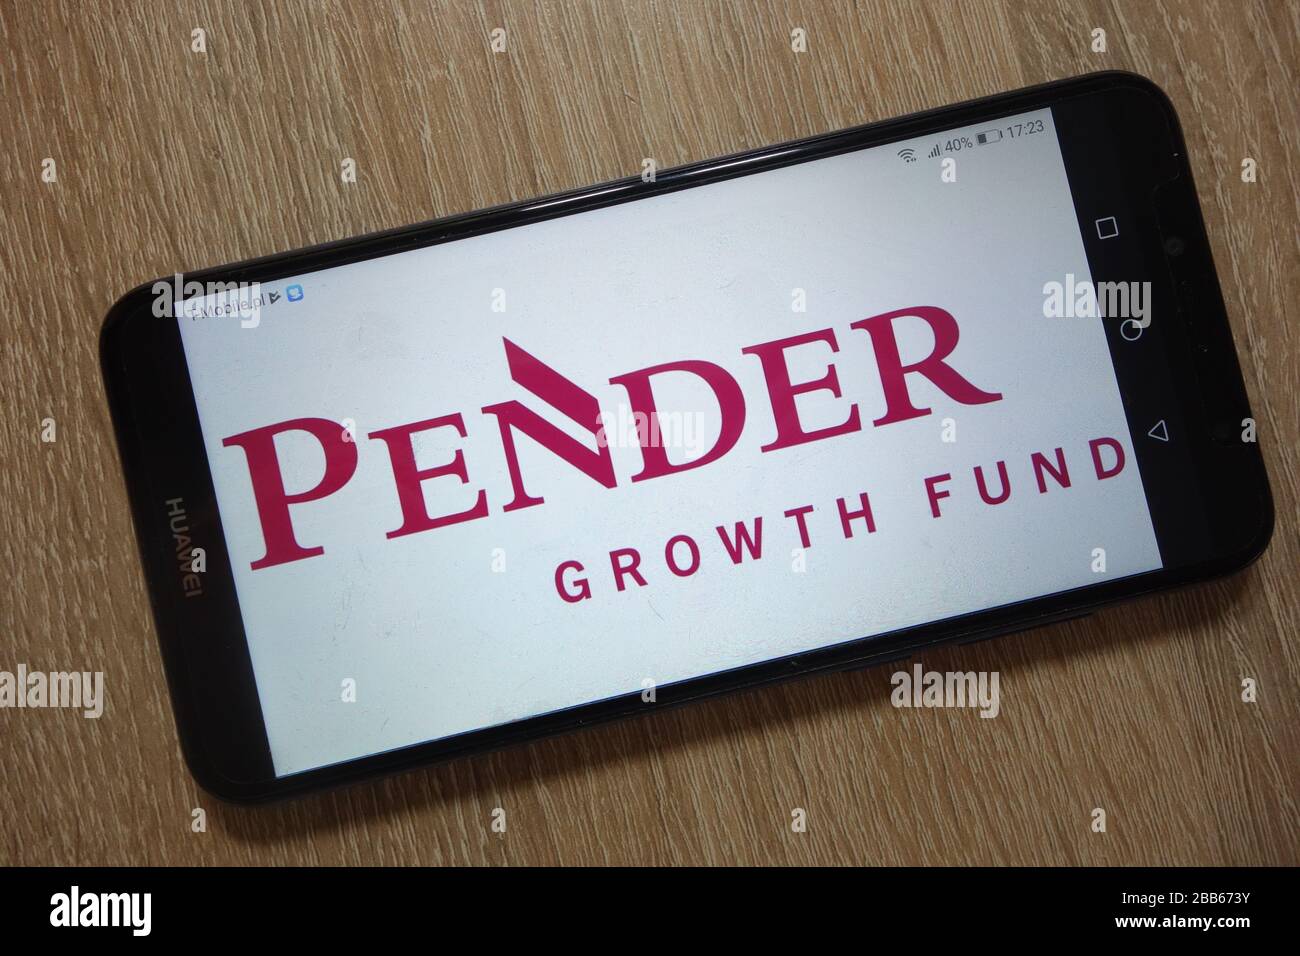 Pender Growth Fund logo displayed on smartphone Stock Photo